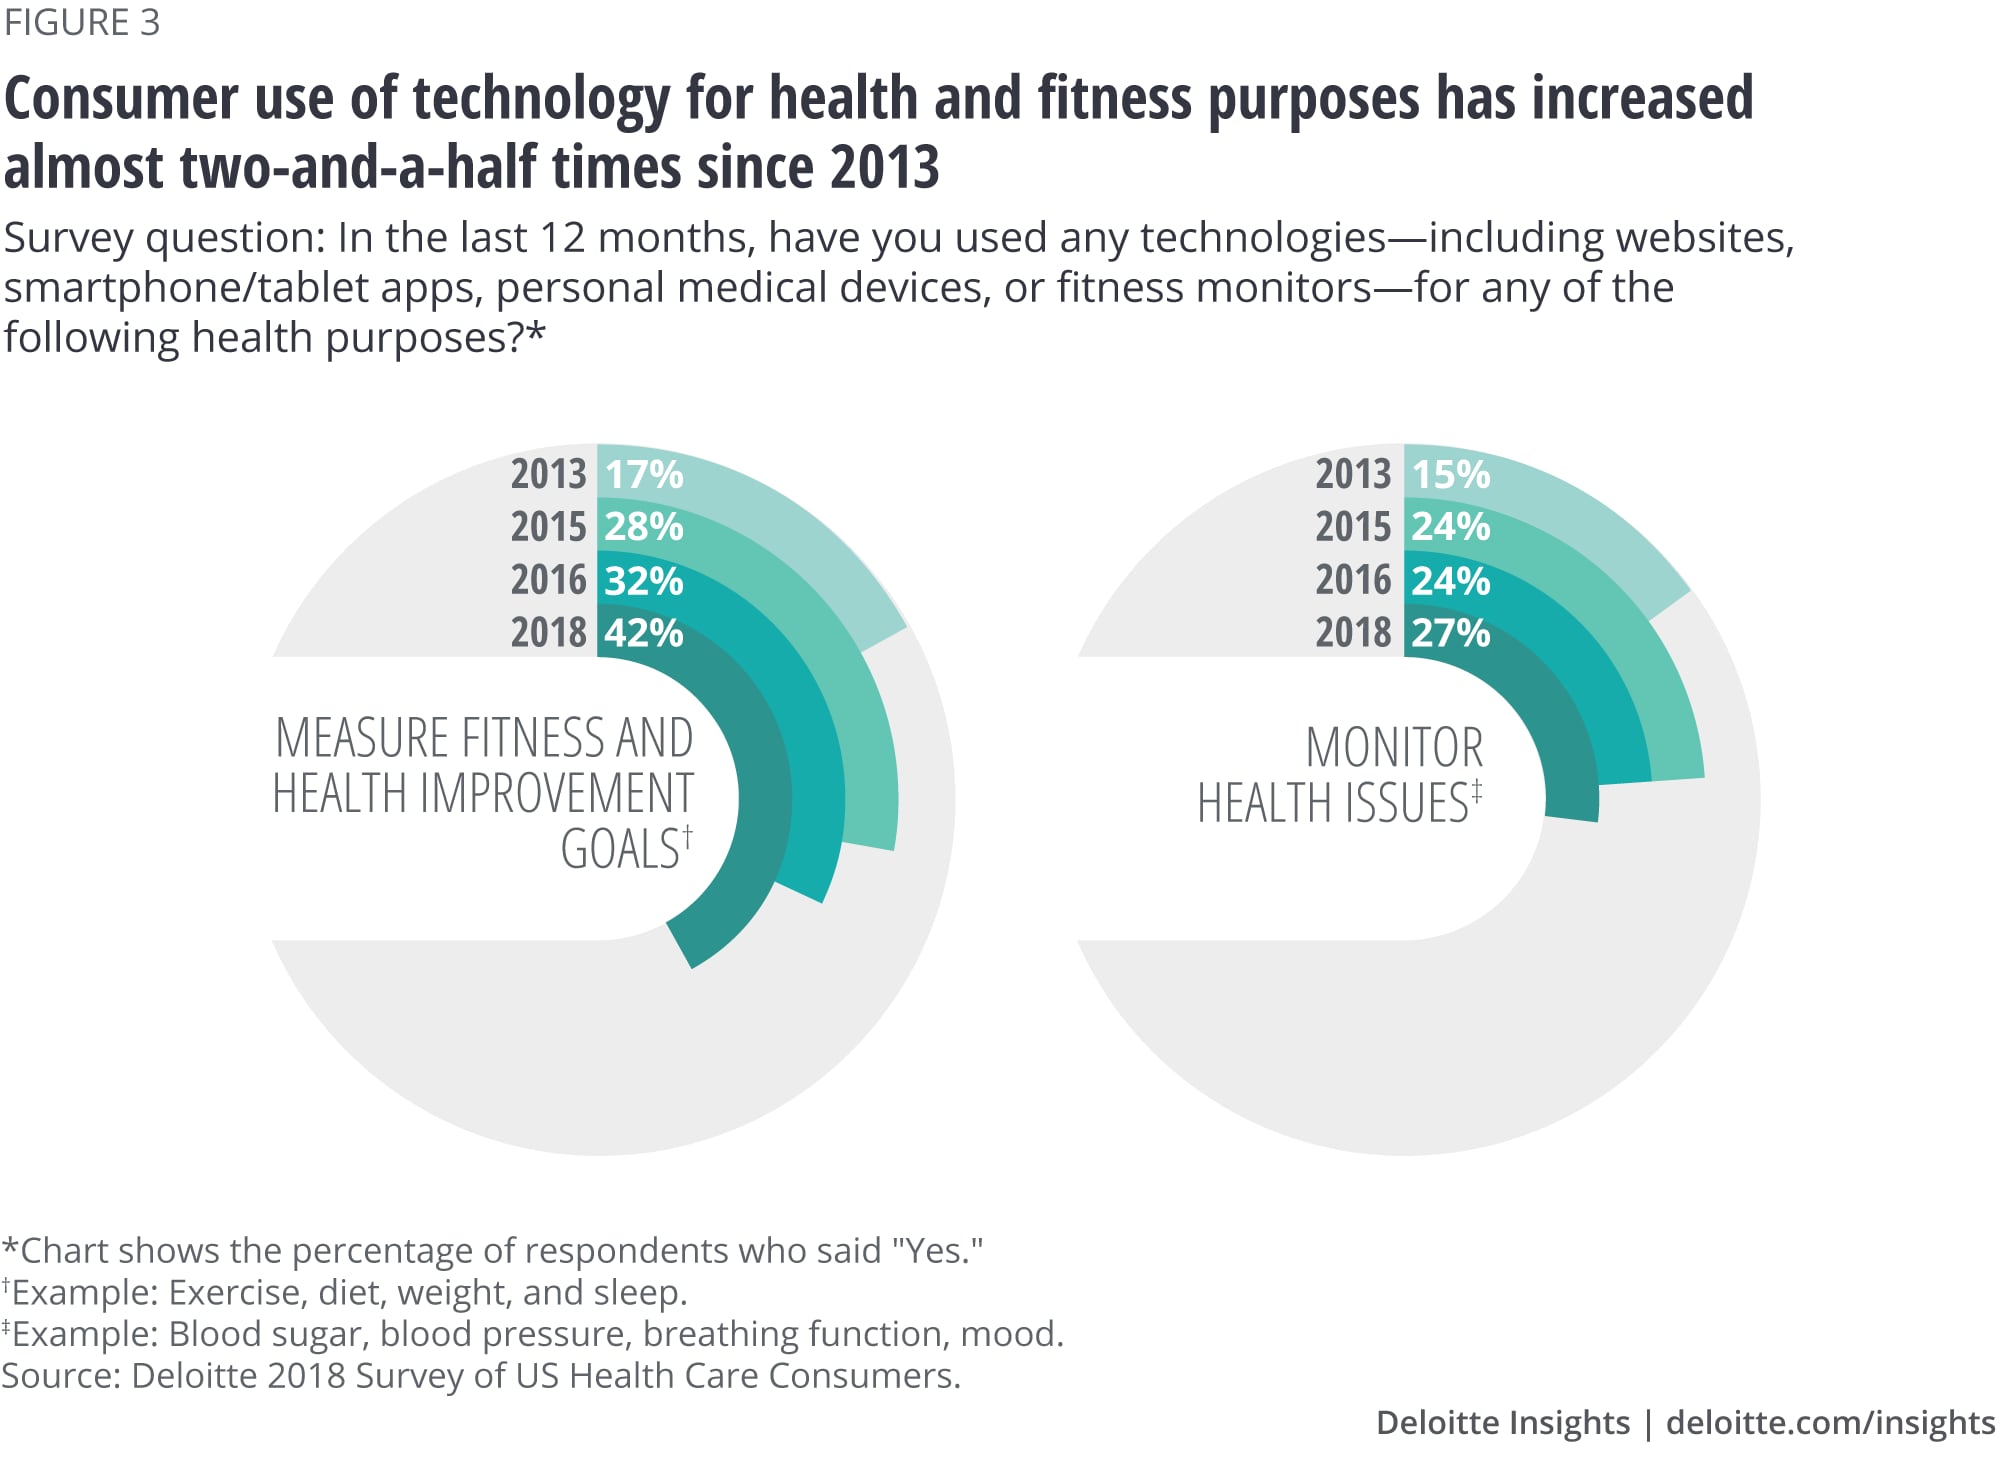 Consumer use of technology for health and fitness purposes has increased almost two-and-a-half times since 2013 